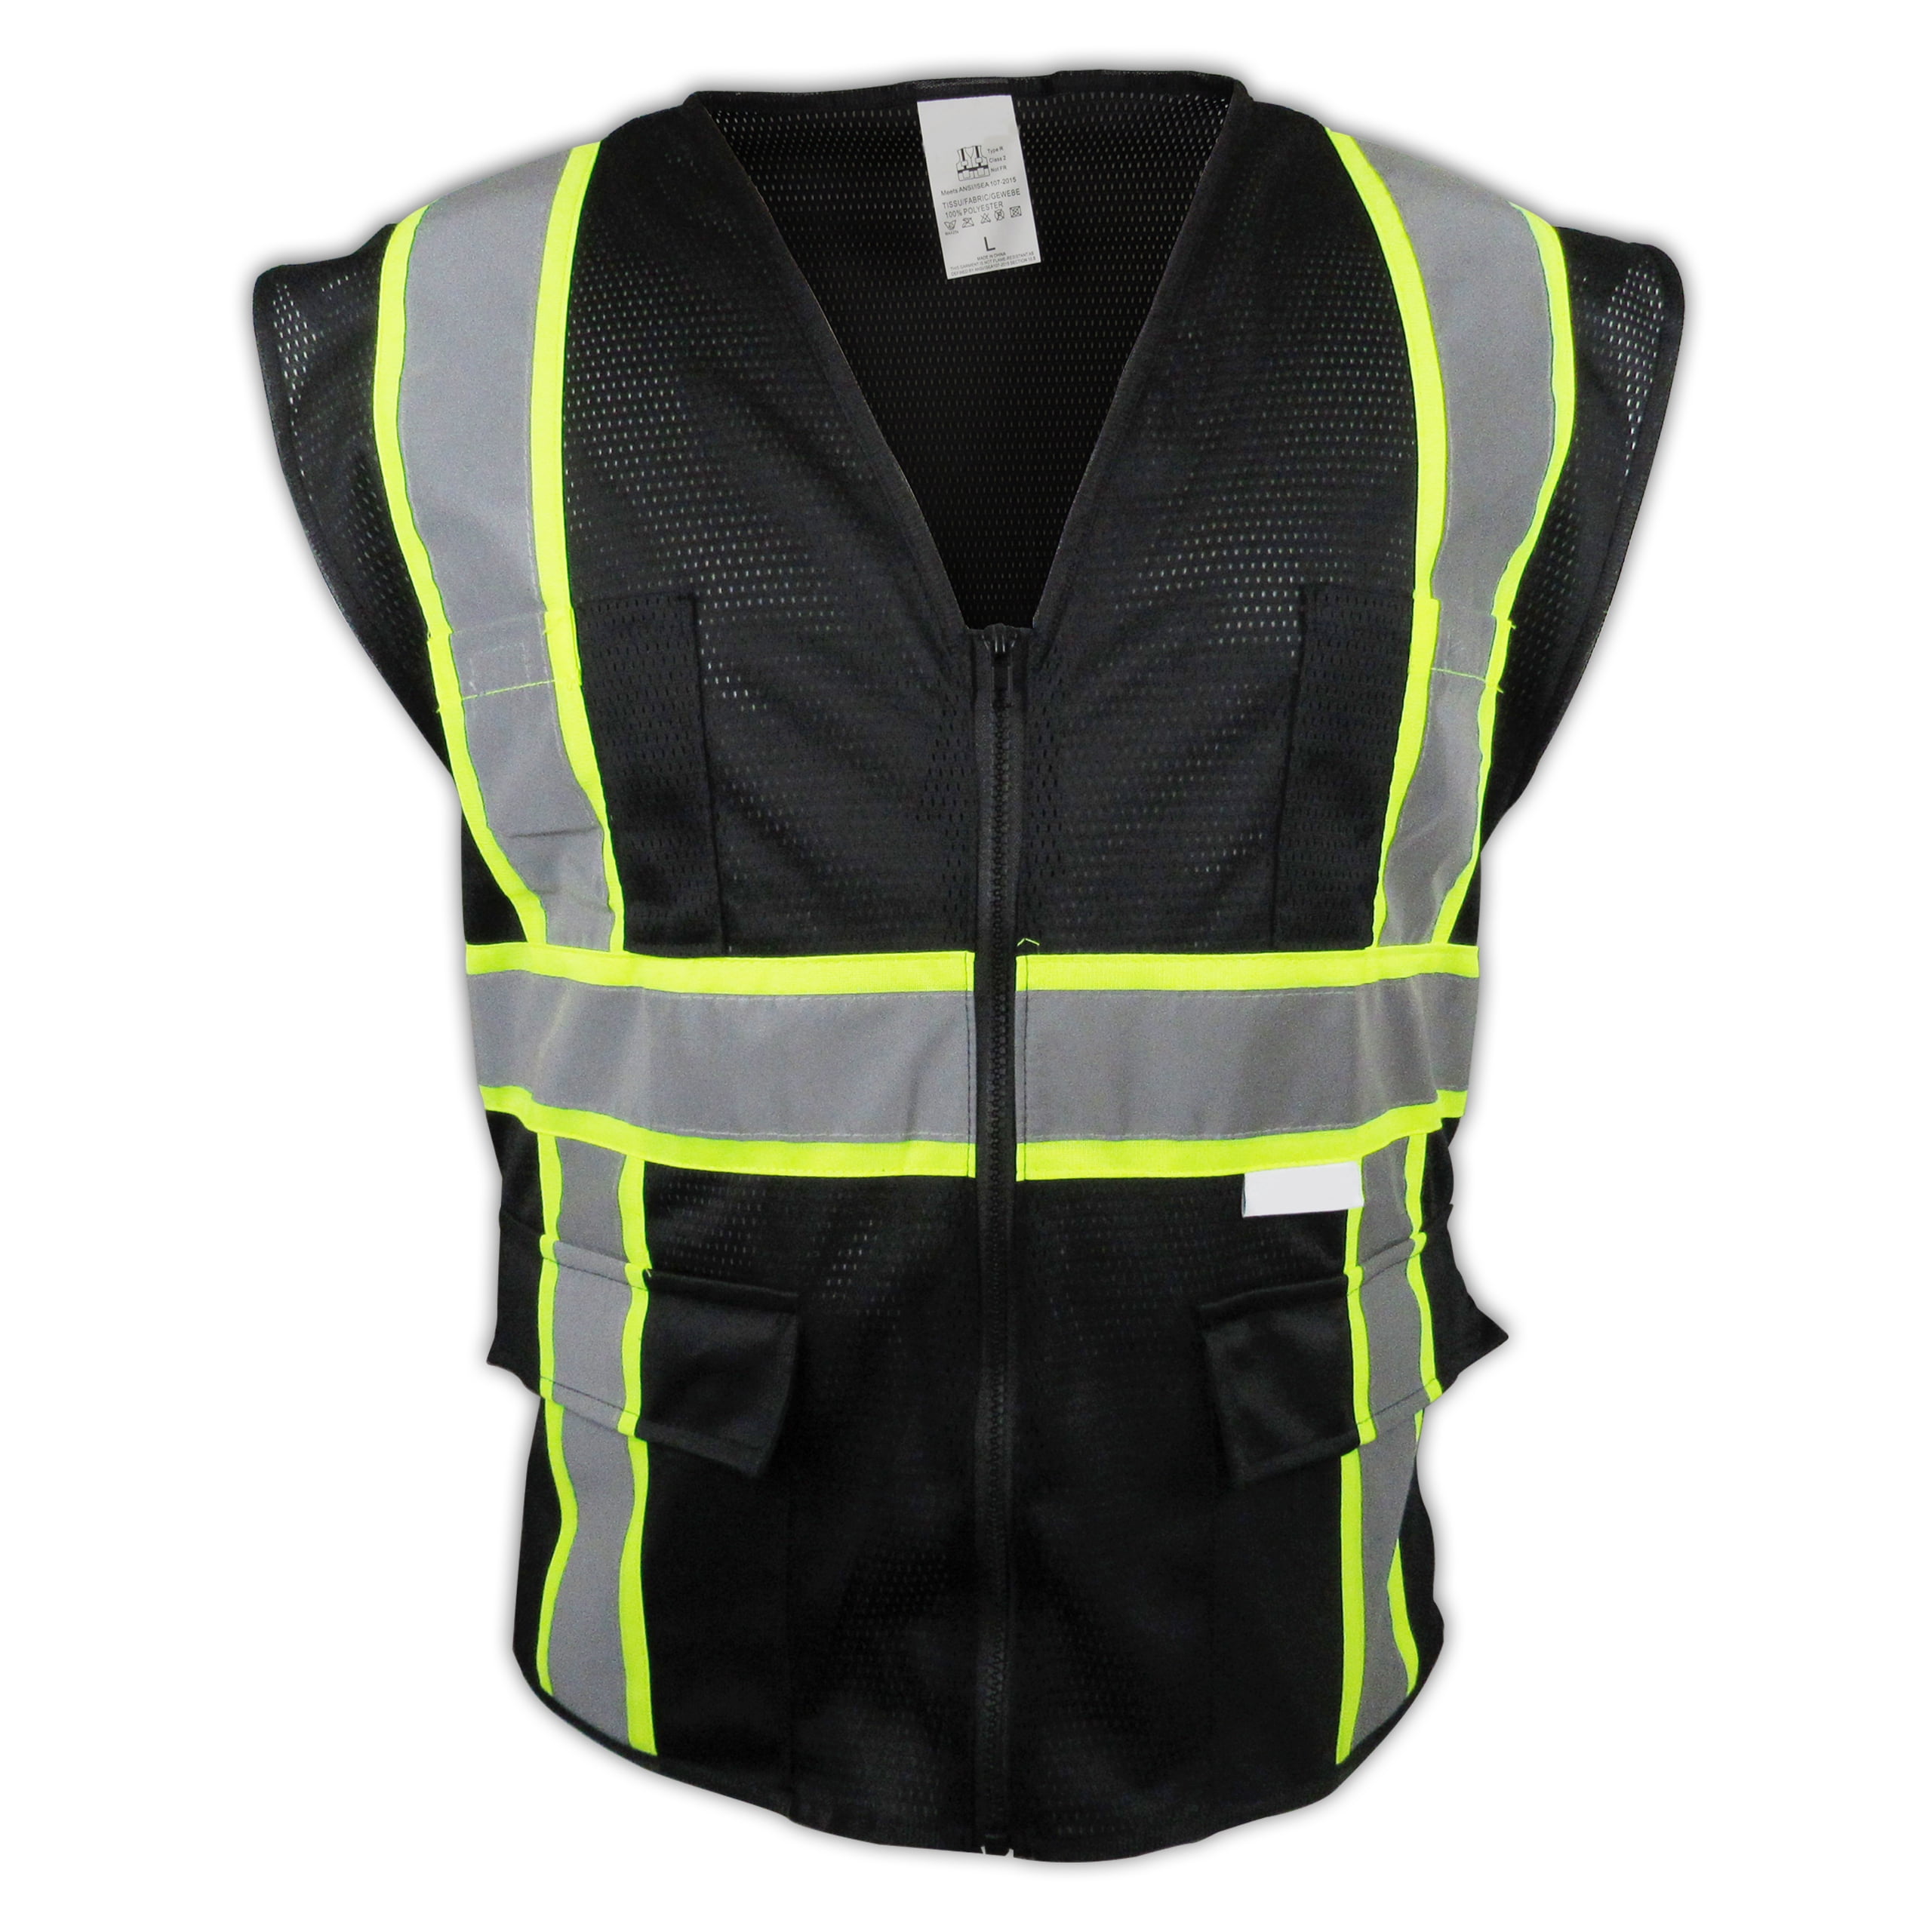 GOGO 9 Pockets High Visibility Zipper Front Safety Vest with Reflective Strips Meets ANSI Standards-Yellow/Blue-XL